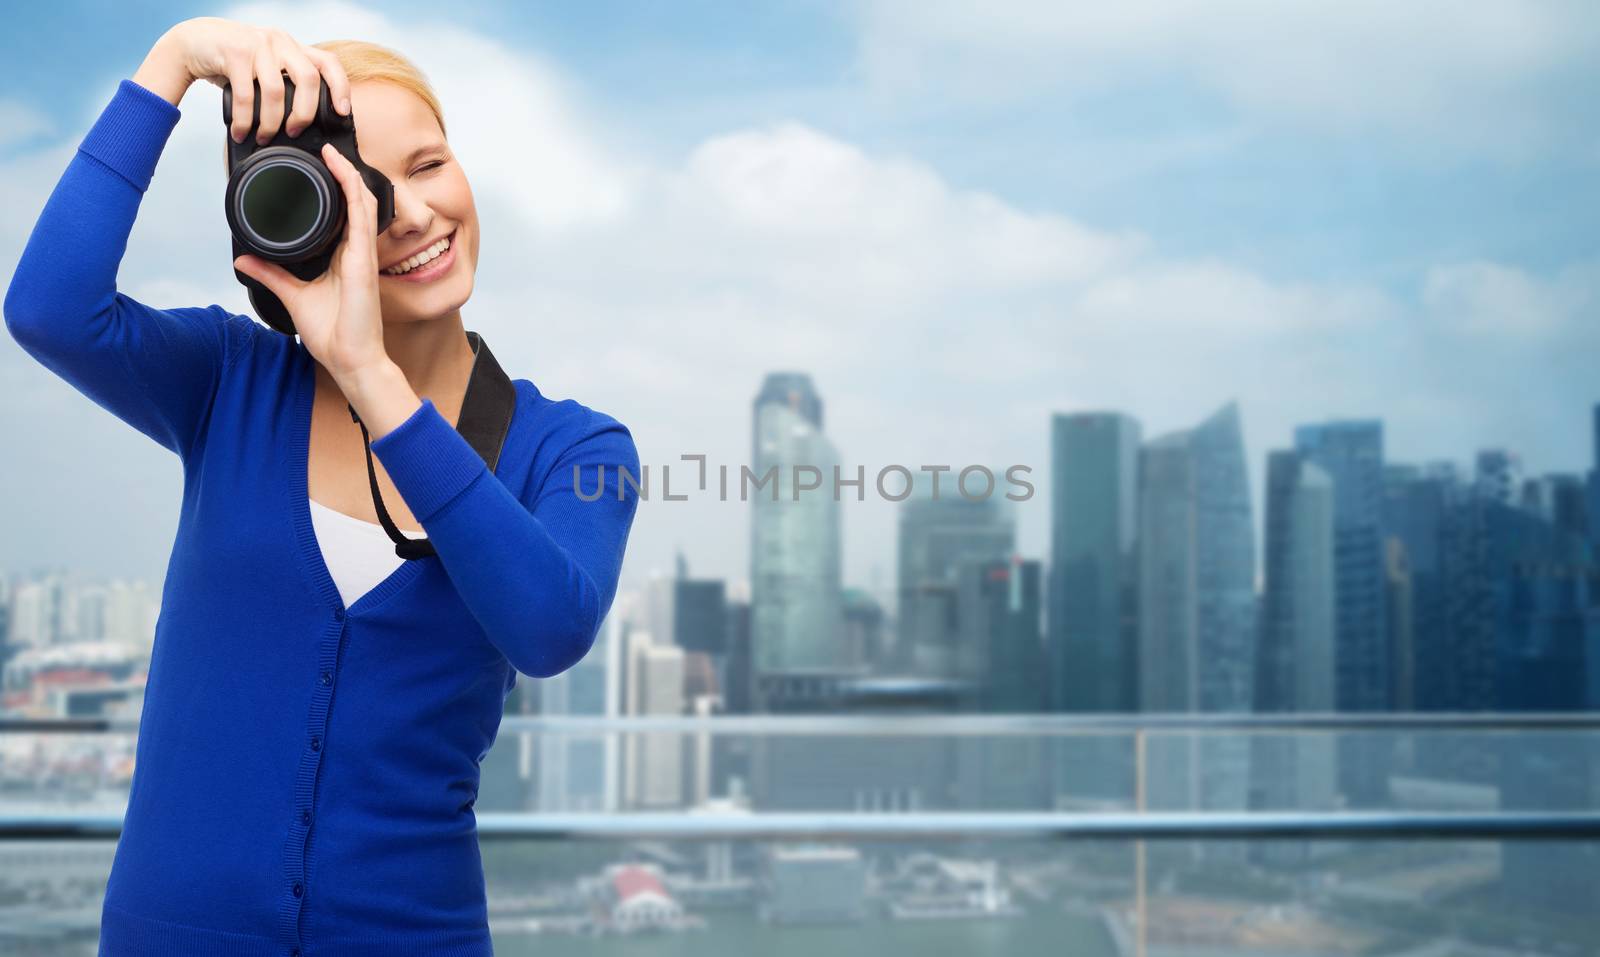 modern technology and people concept - smiling woman in casual clothes taking picture with digital camera over cityscape background